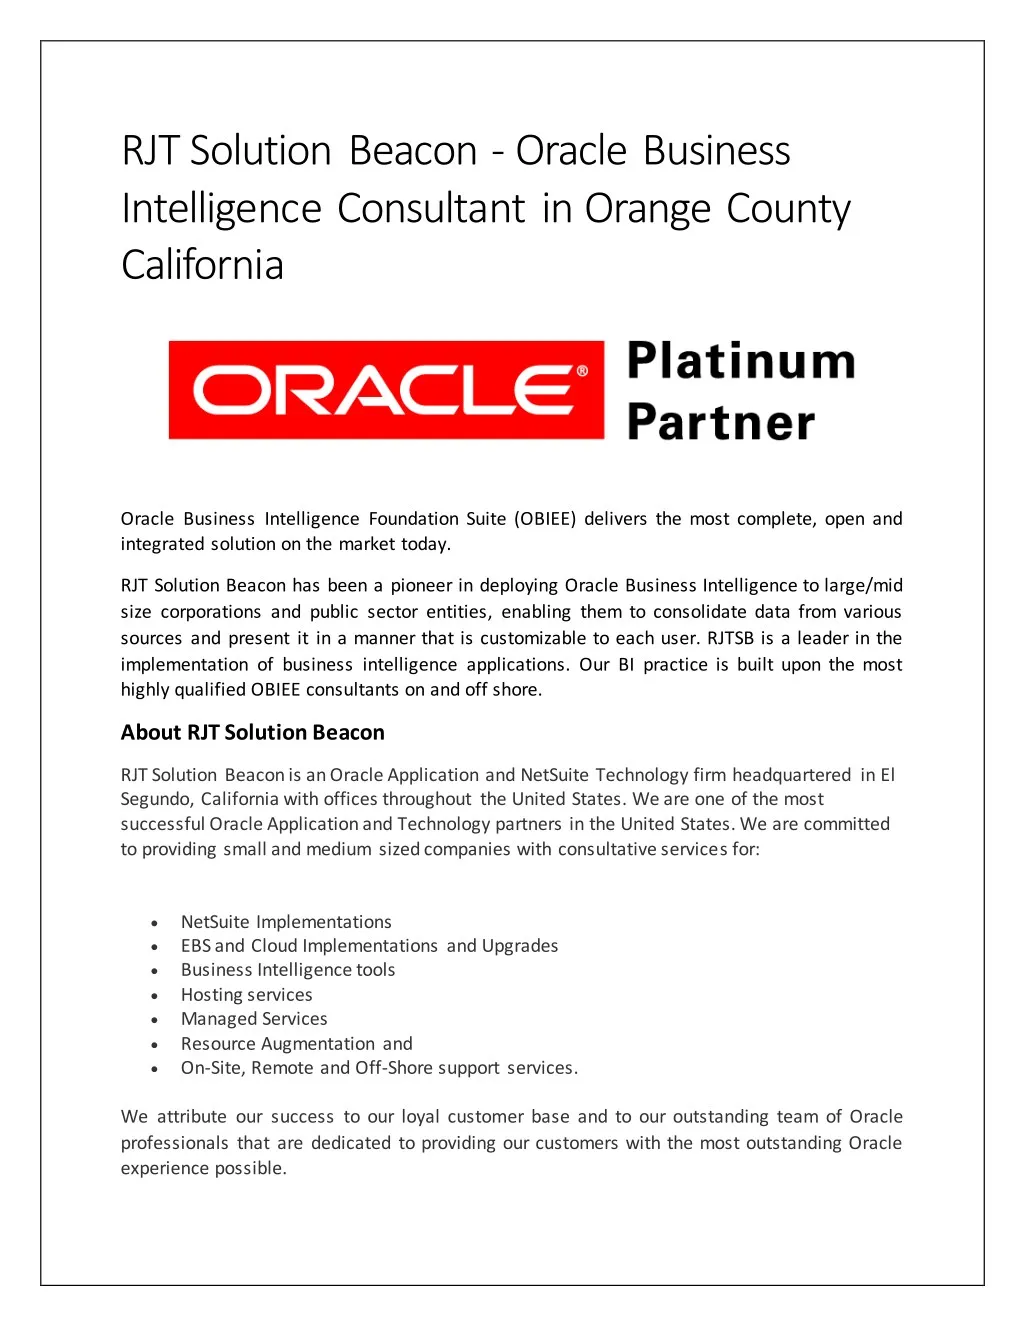 rjt solution beacon oracle business intelligence